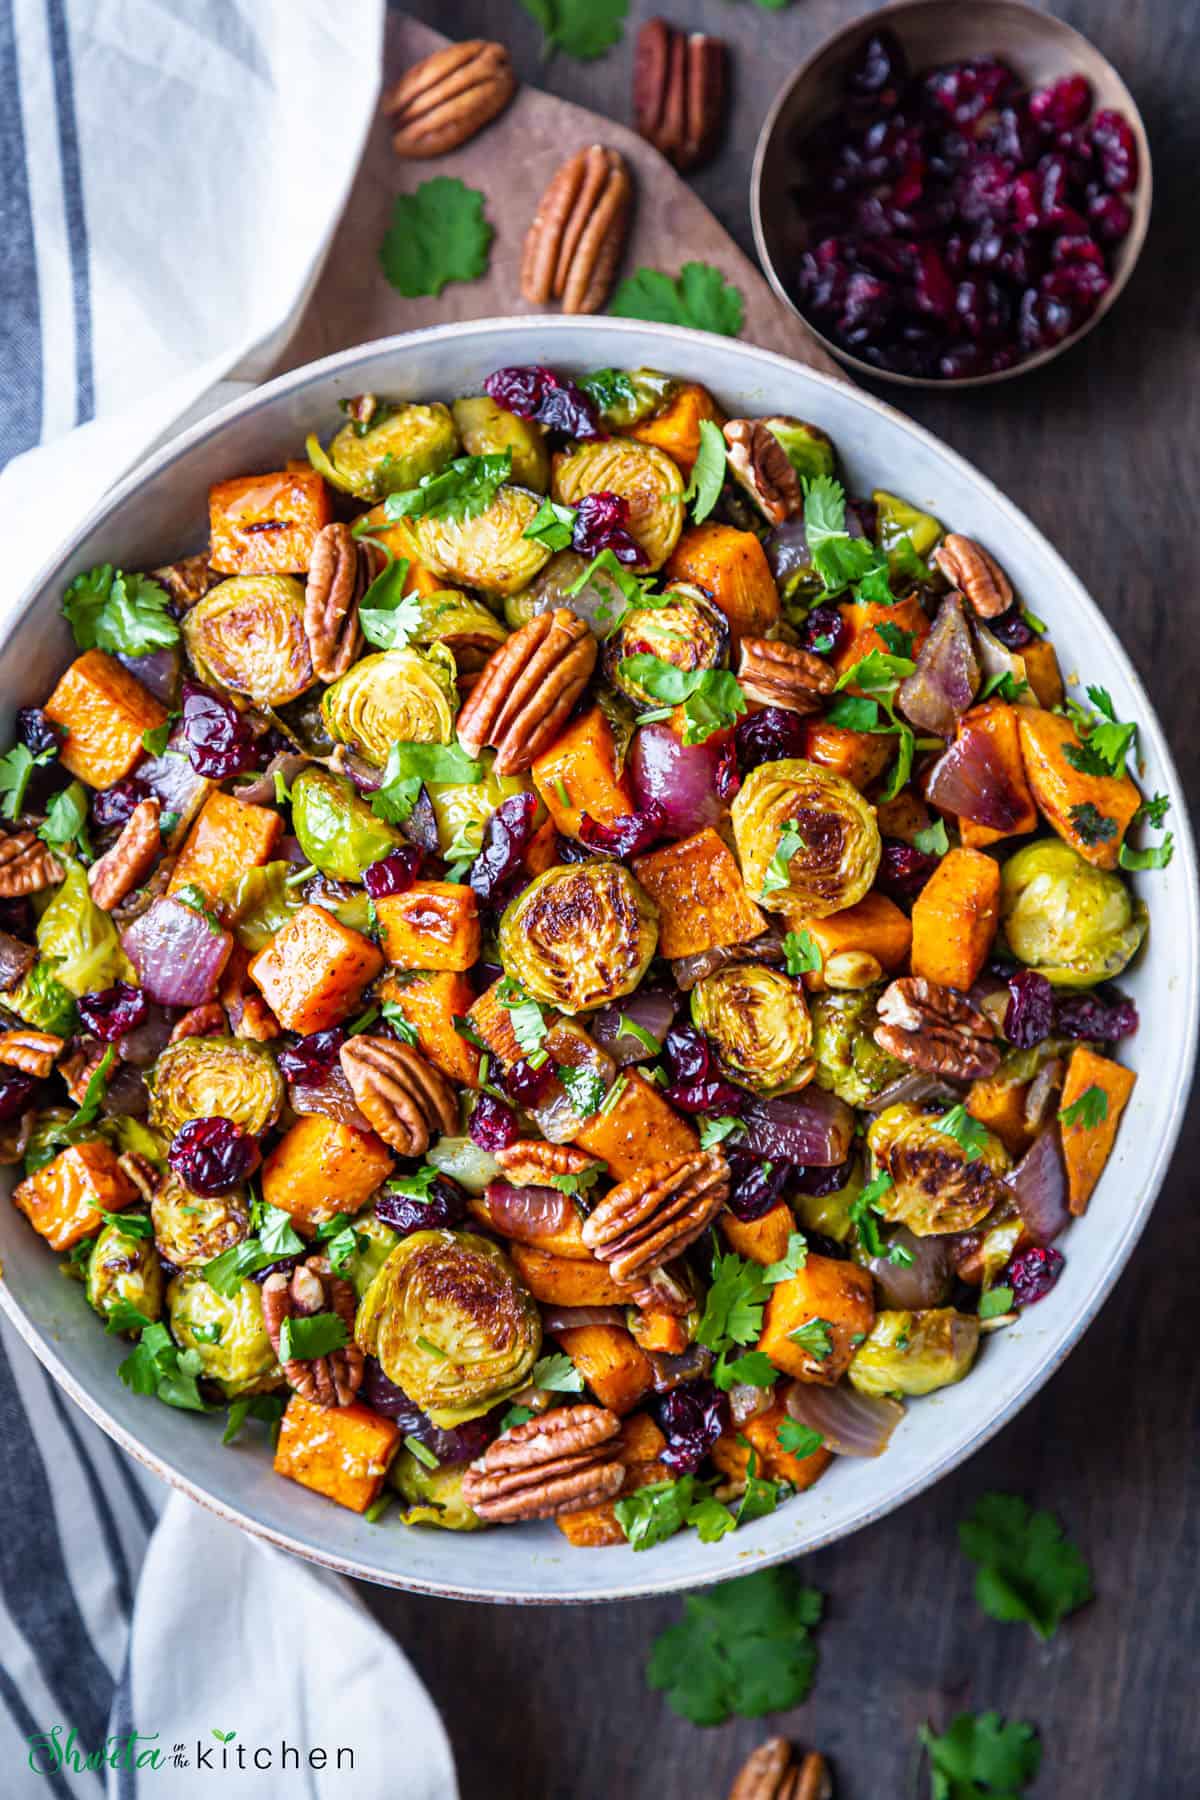 Roasted Brussels Sprouts and Sweet Potatoes - Shweta in the Kitchen